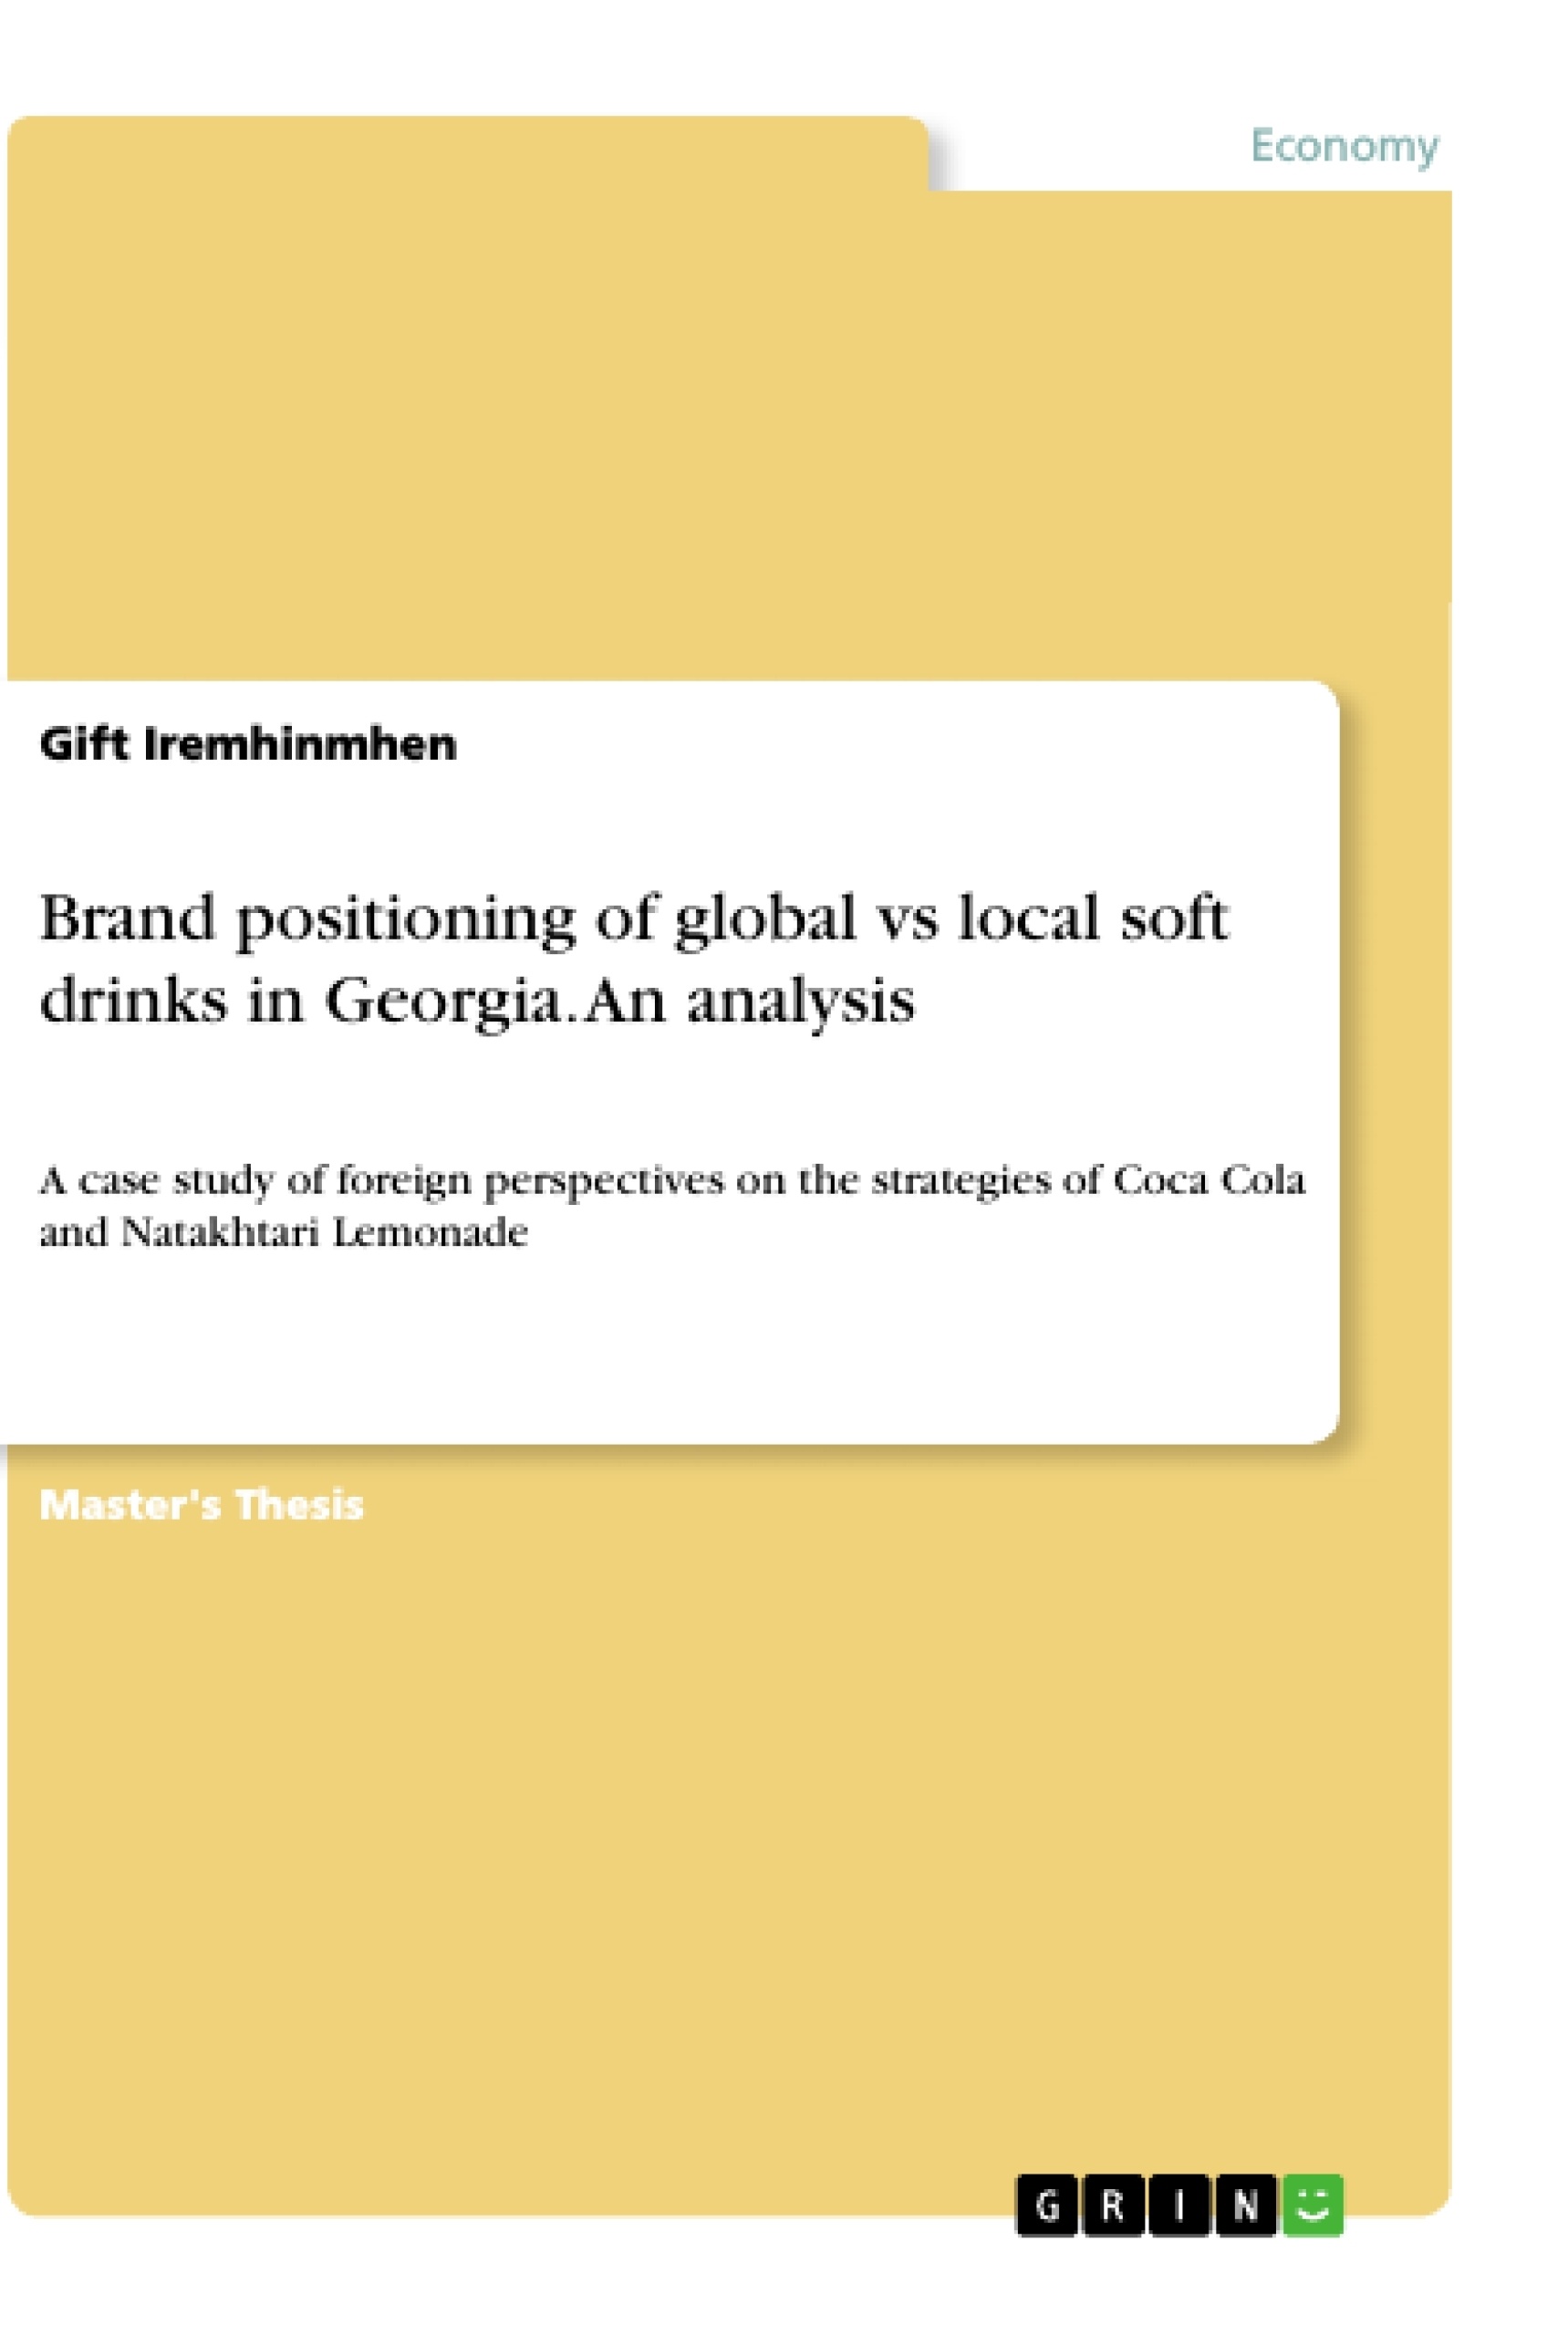 Title: Brand positioning of global vs local soft drinks in Georgia. An analysis